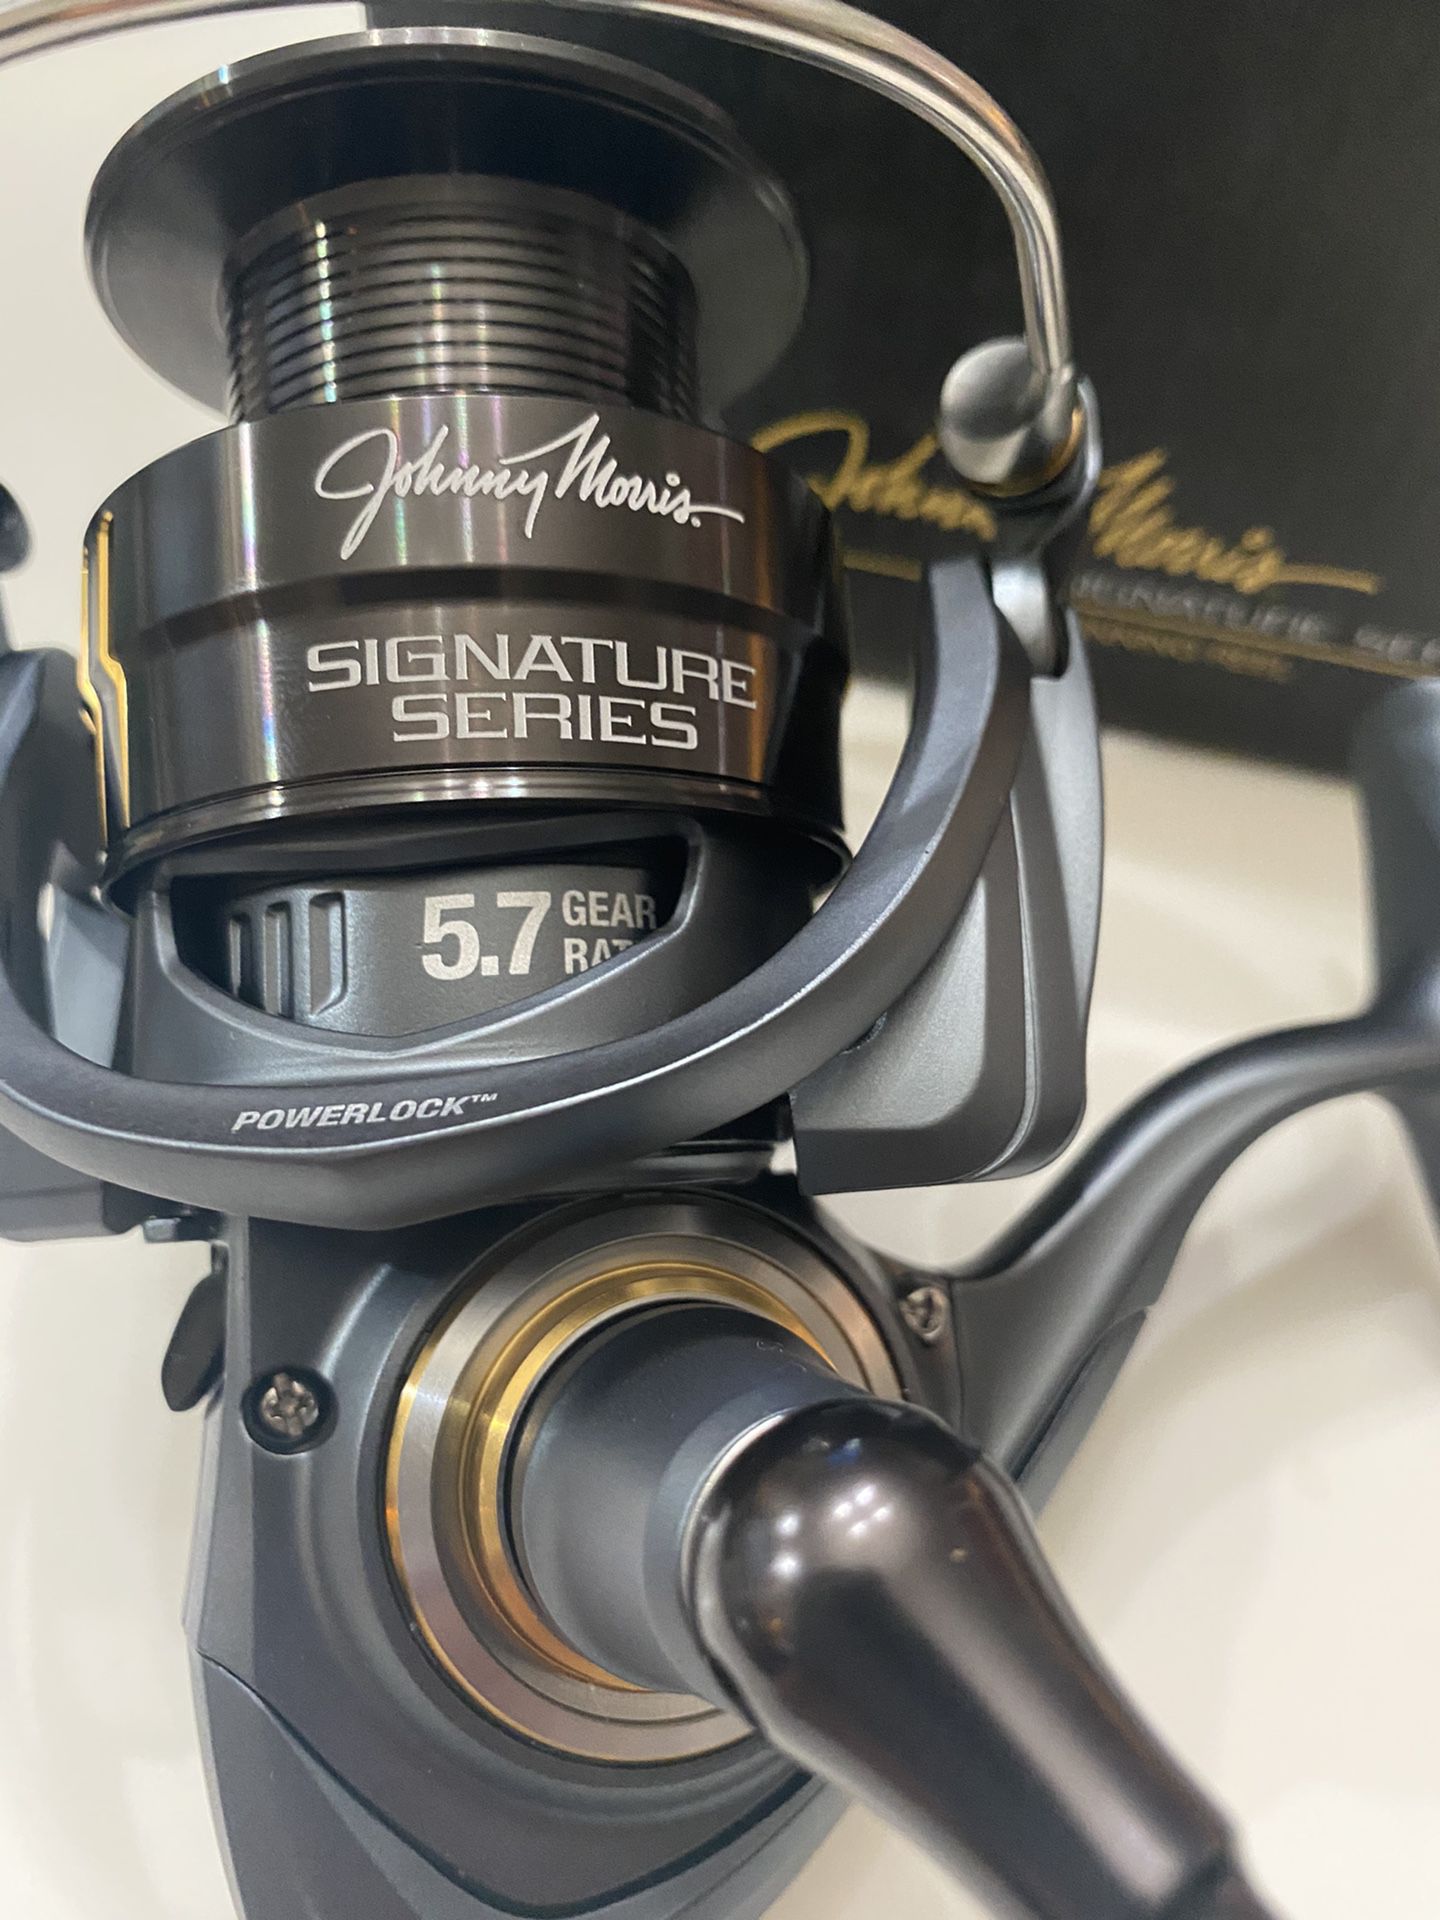 NEW Bass Pro Shops Johnny Morris Signature Series Spinning Fishing Reel 